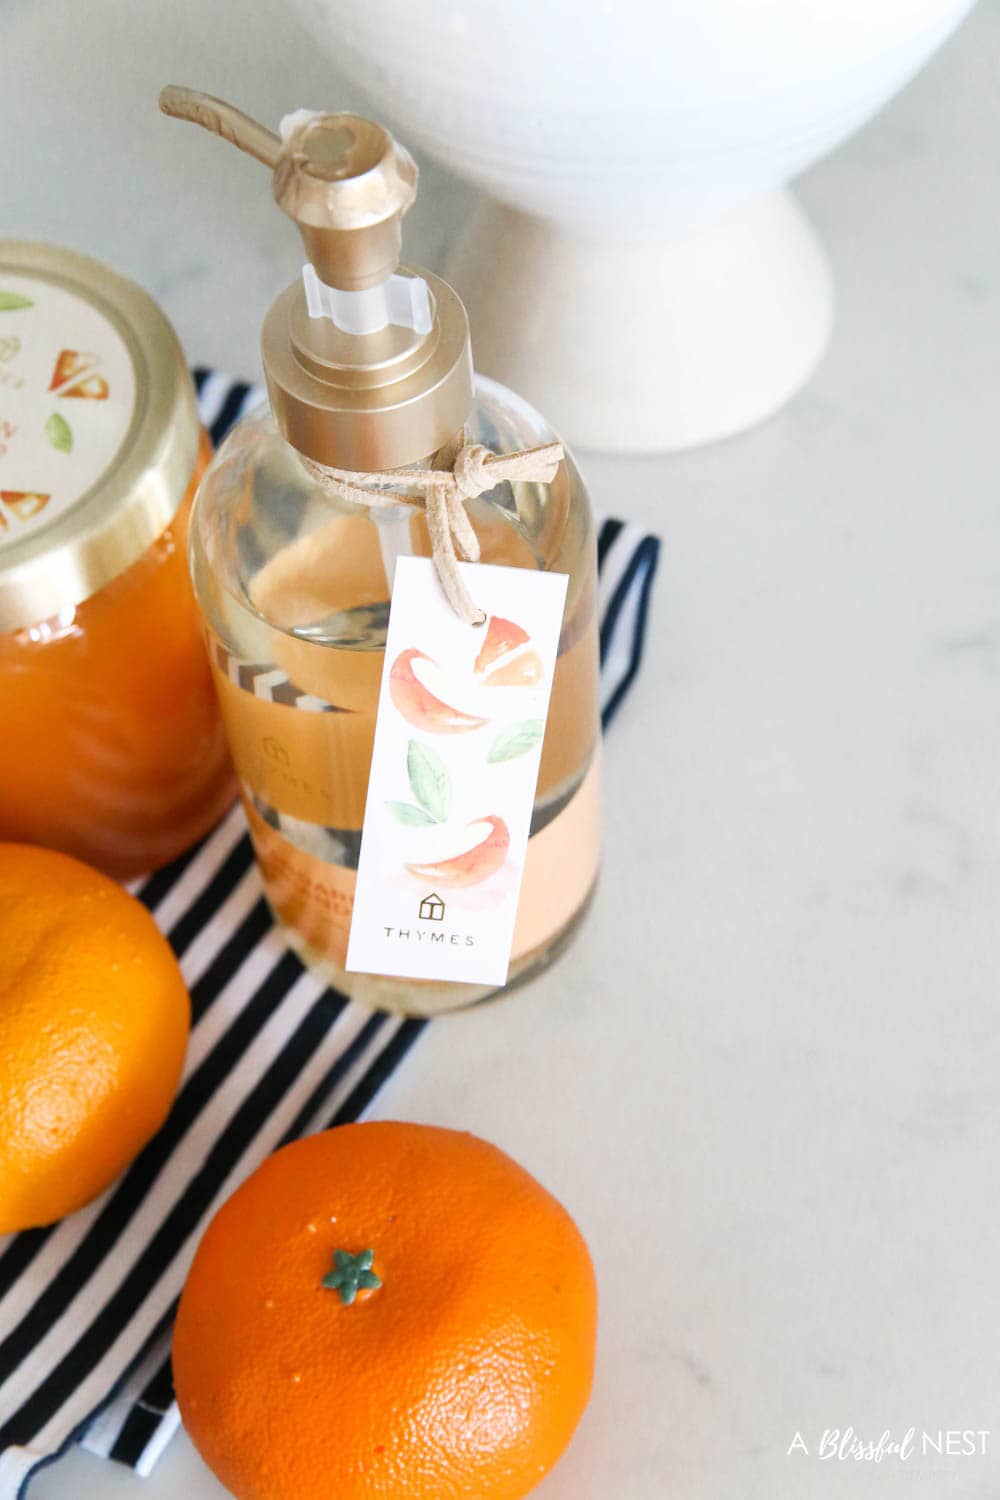 Orange hand soap by Thymes